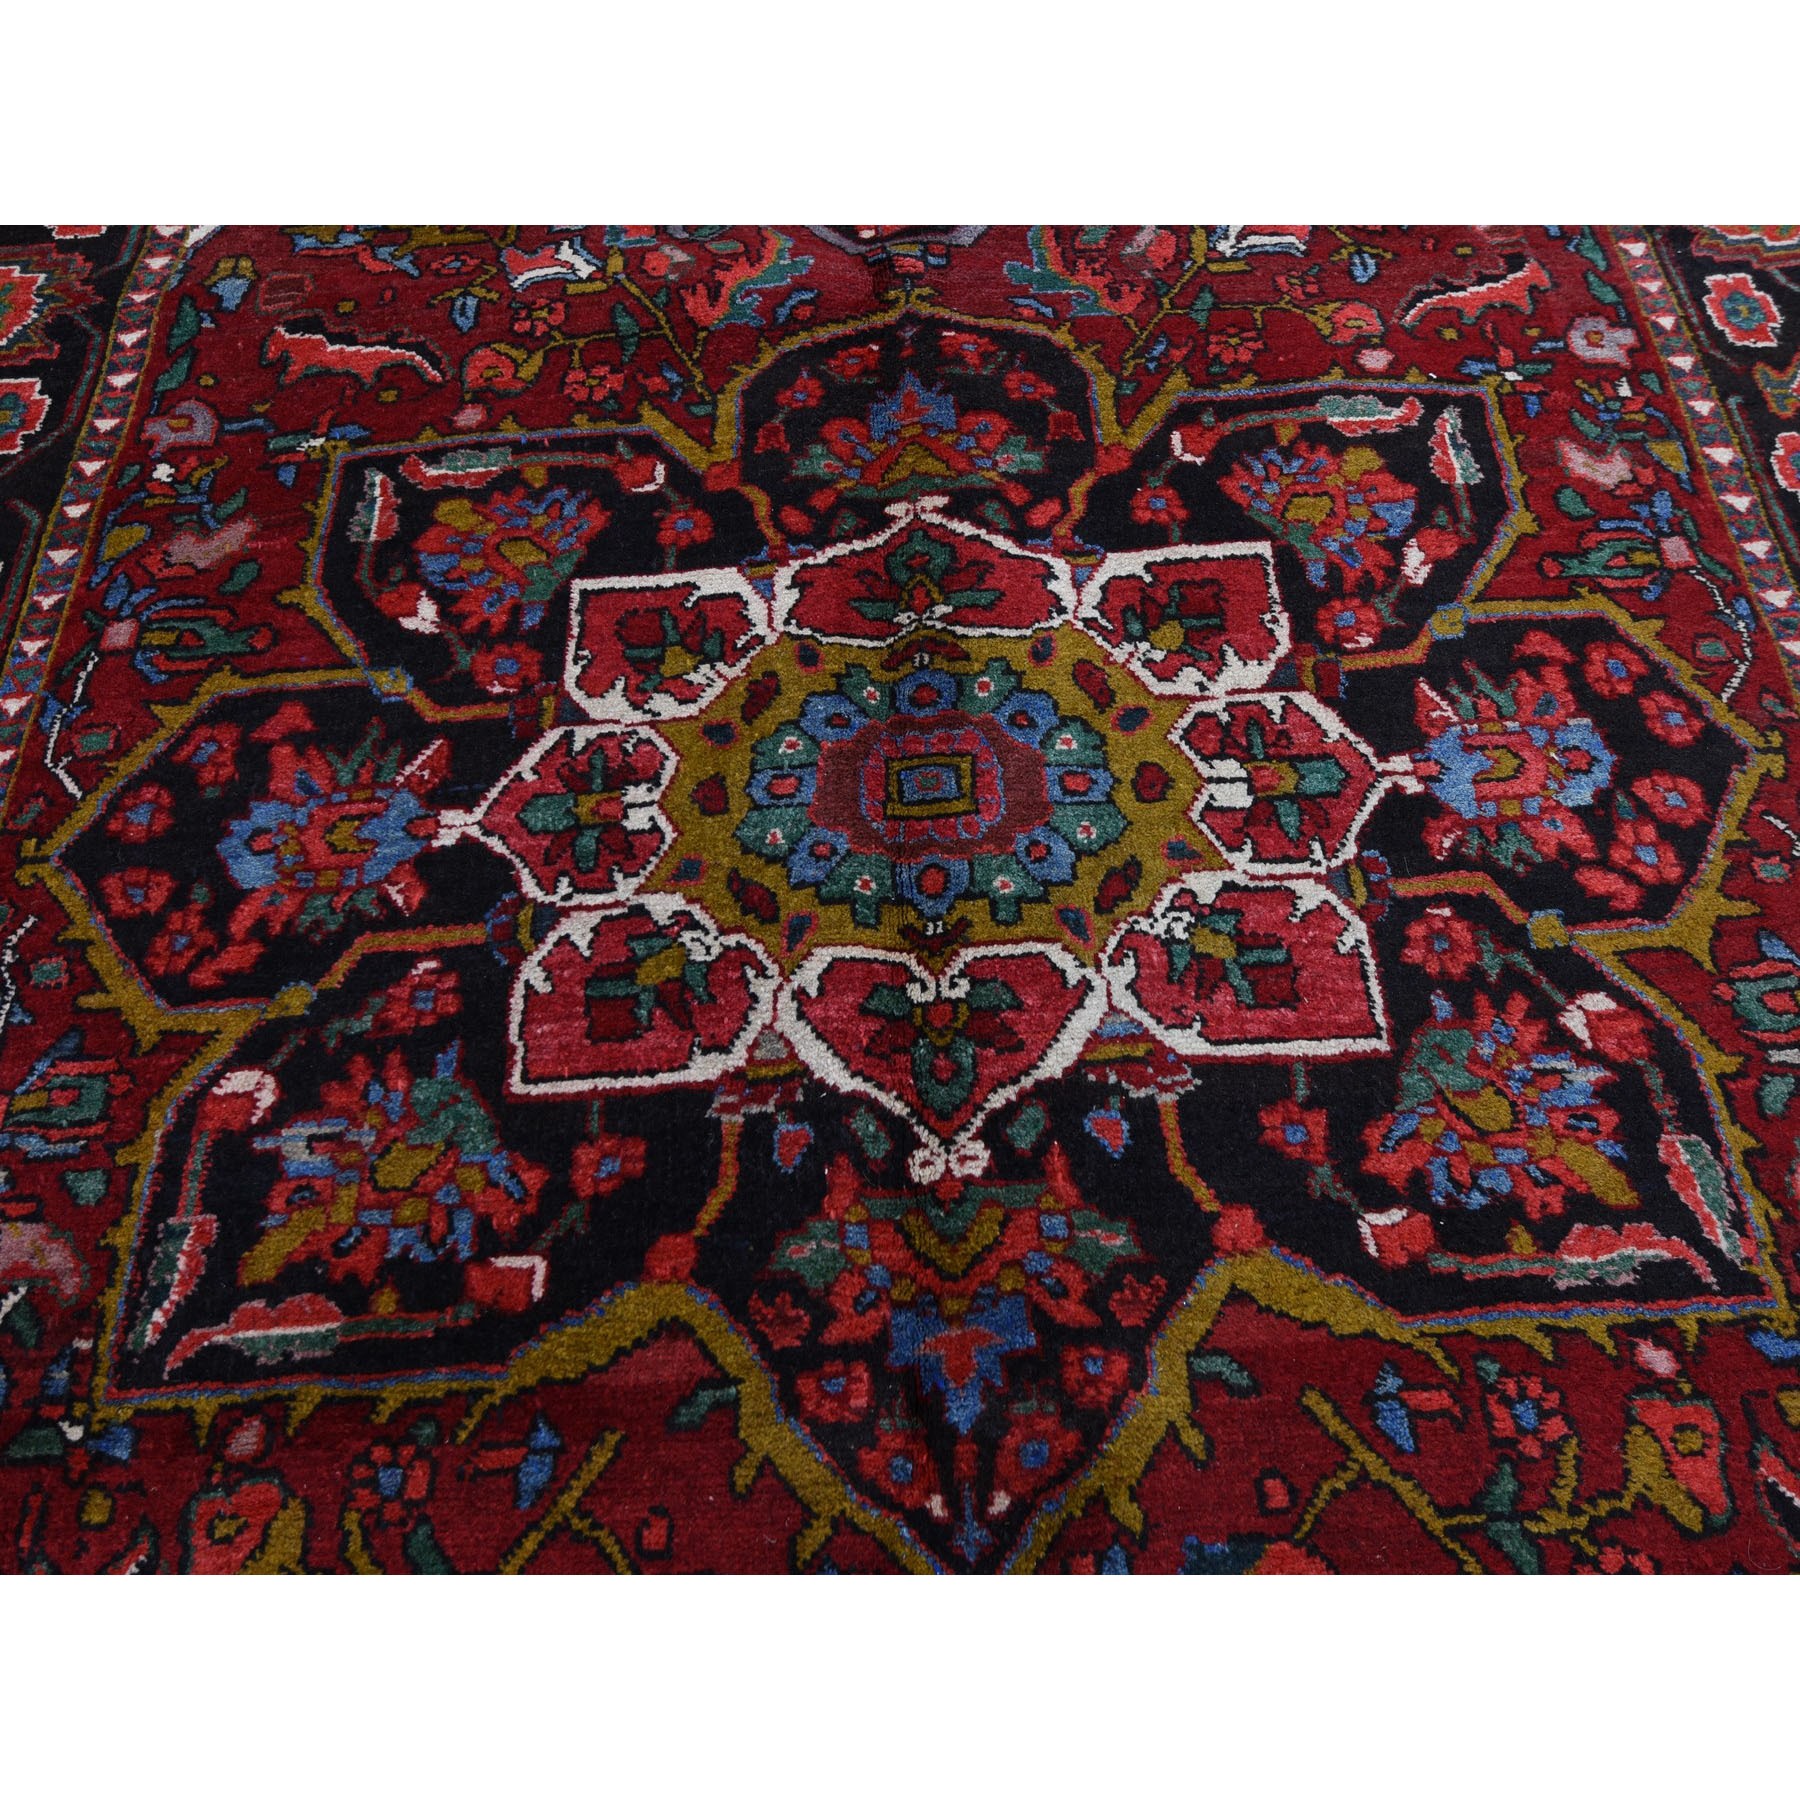 7-2 x10-3  Red Semi Antique Persian Heriz Flower Design Thick and Plush Hand Knotted Oriental Rug 